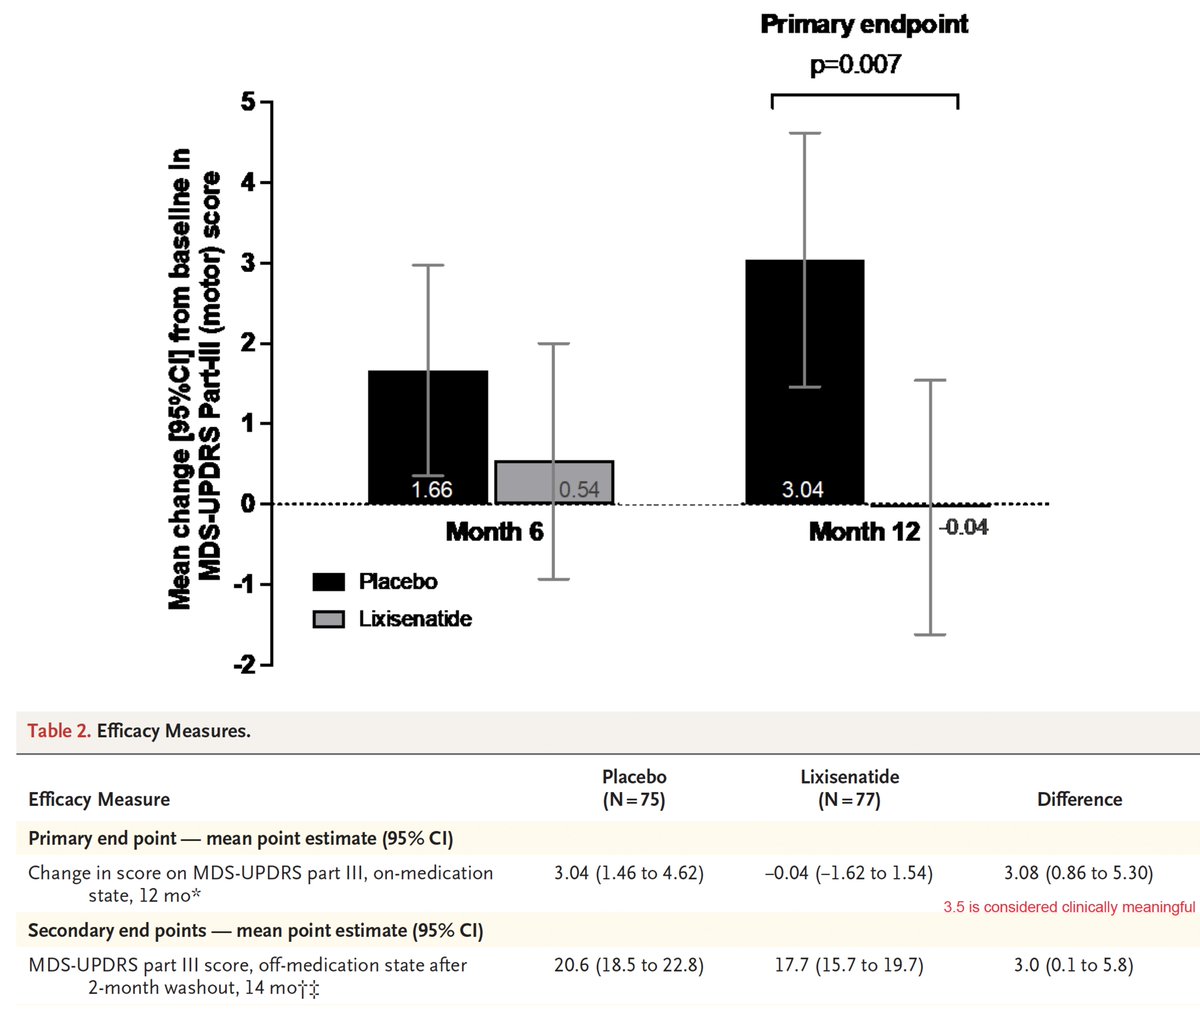 Some exciting new GLP-1 drug randomized trial evidence for *potential* disease-modifying impact on #Parkinsons disease (there are none). No progression of motor disability in the Rx group for 12 months. nejm.org/doi/full/10.10…